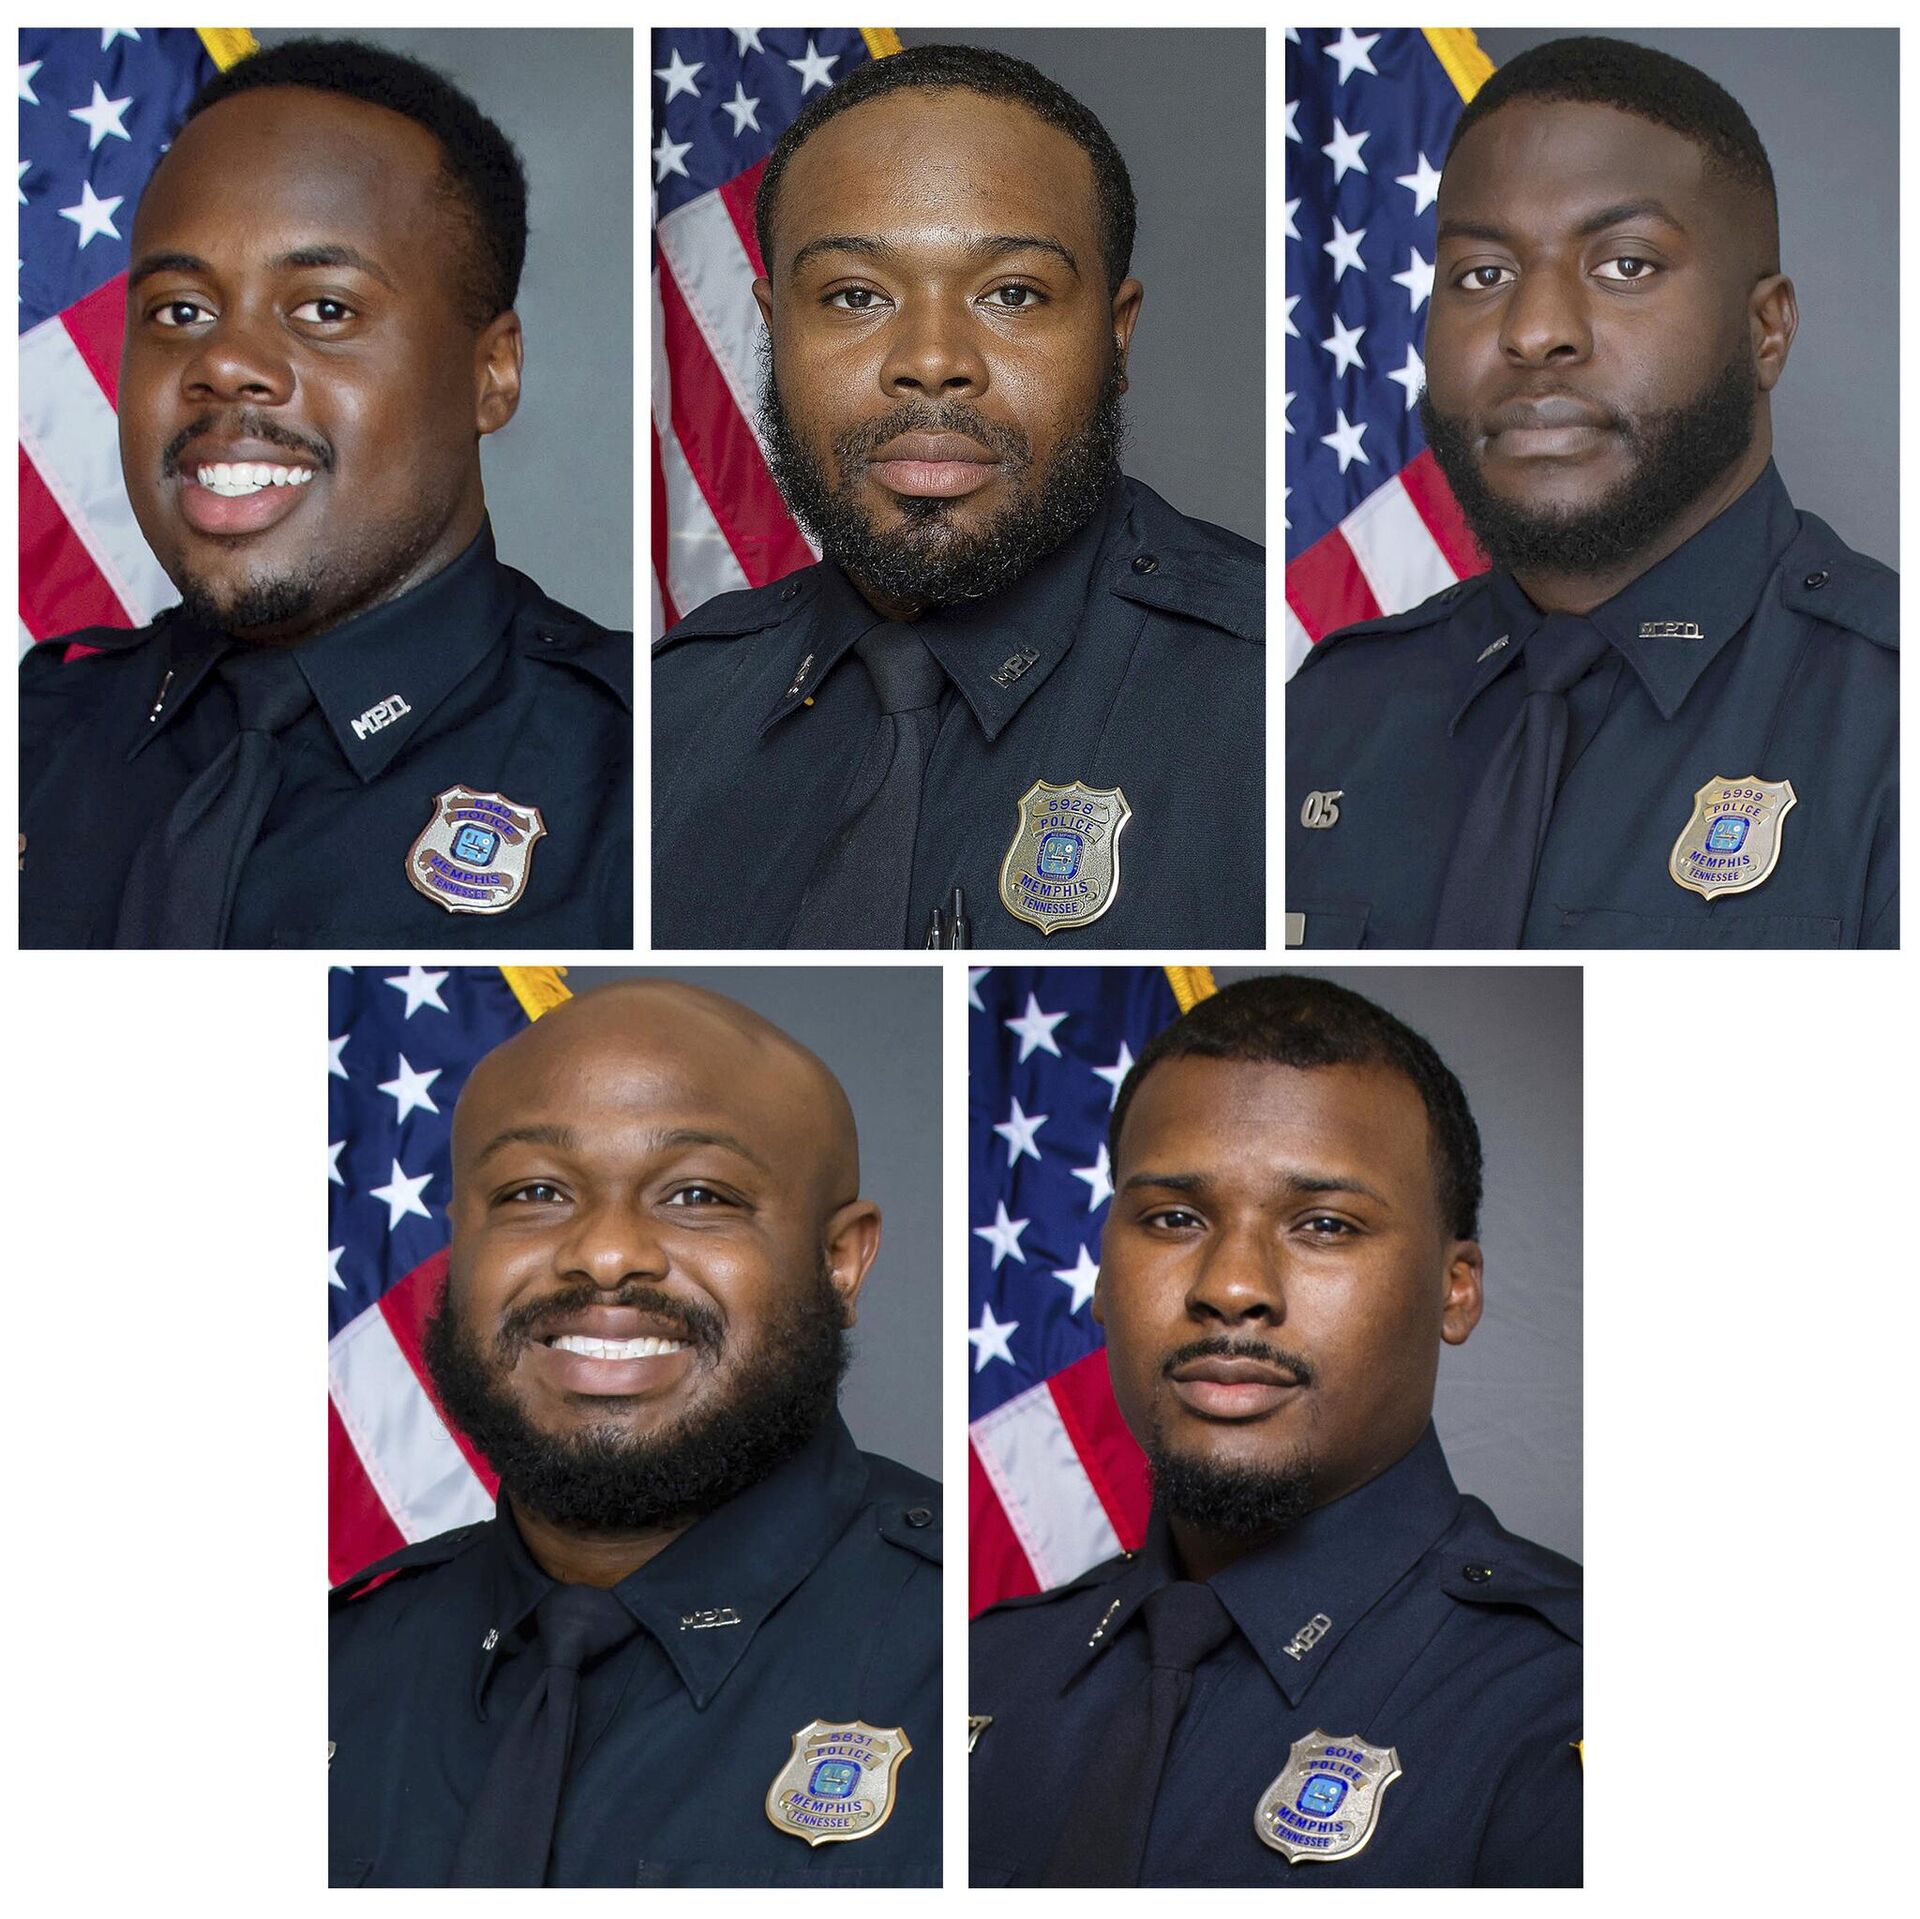 FILE - This combo of images provided by the Memphis, Tenn., Police Department shows, top row from left, officers Tadarrius Bean, Demetrius Haley, Emmitt Martin III, and bottom row from left, Desmond Mills Jr. and Justin Smith. The five former Memphis police officers are now facing federal civil rights charges in the beating death of Tyre Nichols as they continue to fight second-degree murder charges in state courts arising from the killing. They were indicted Tuesday, Sept. 12, 2023, in U.S. District Court in Memphis. - Sputnik International, 1920, 13.09.2023